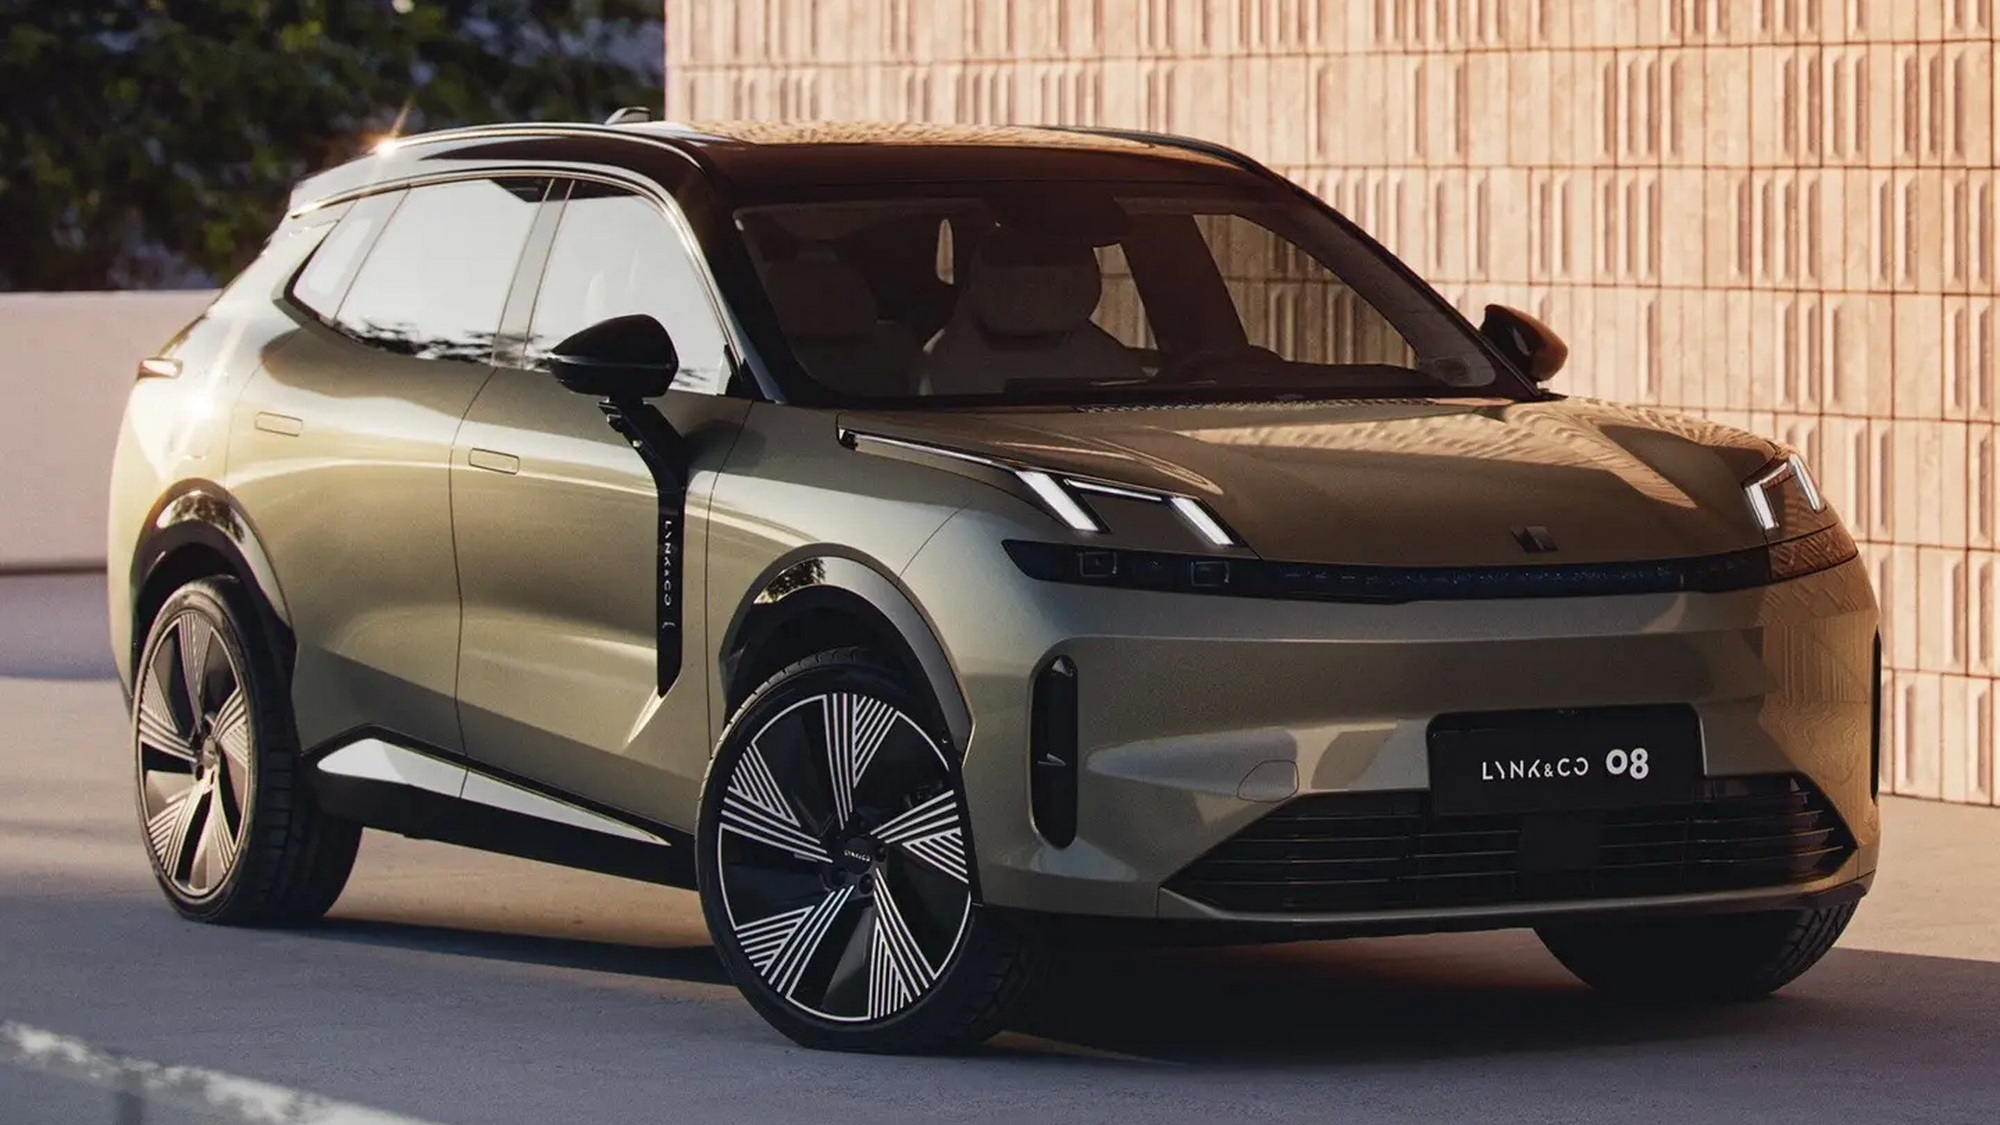 Lynk & Co 08: New Volvo-Based Mid-Size SUV Reveals Its Exterior